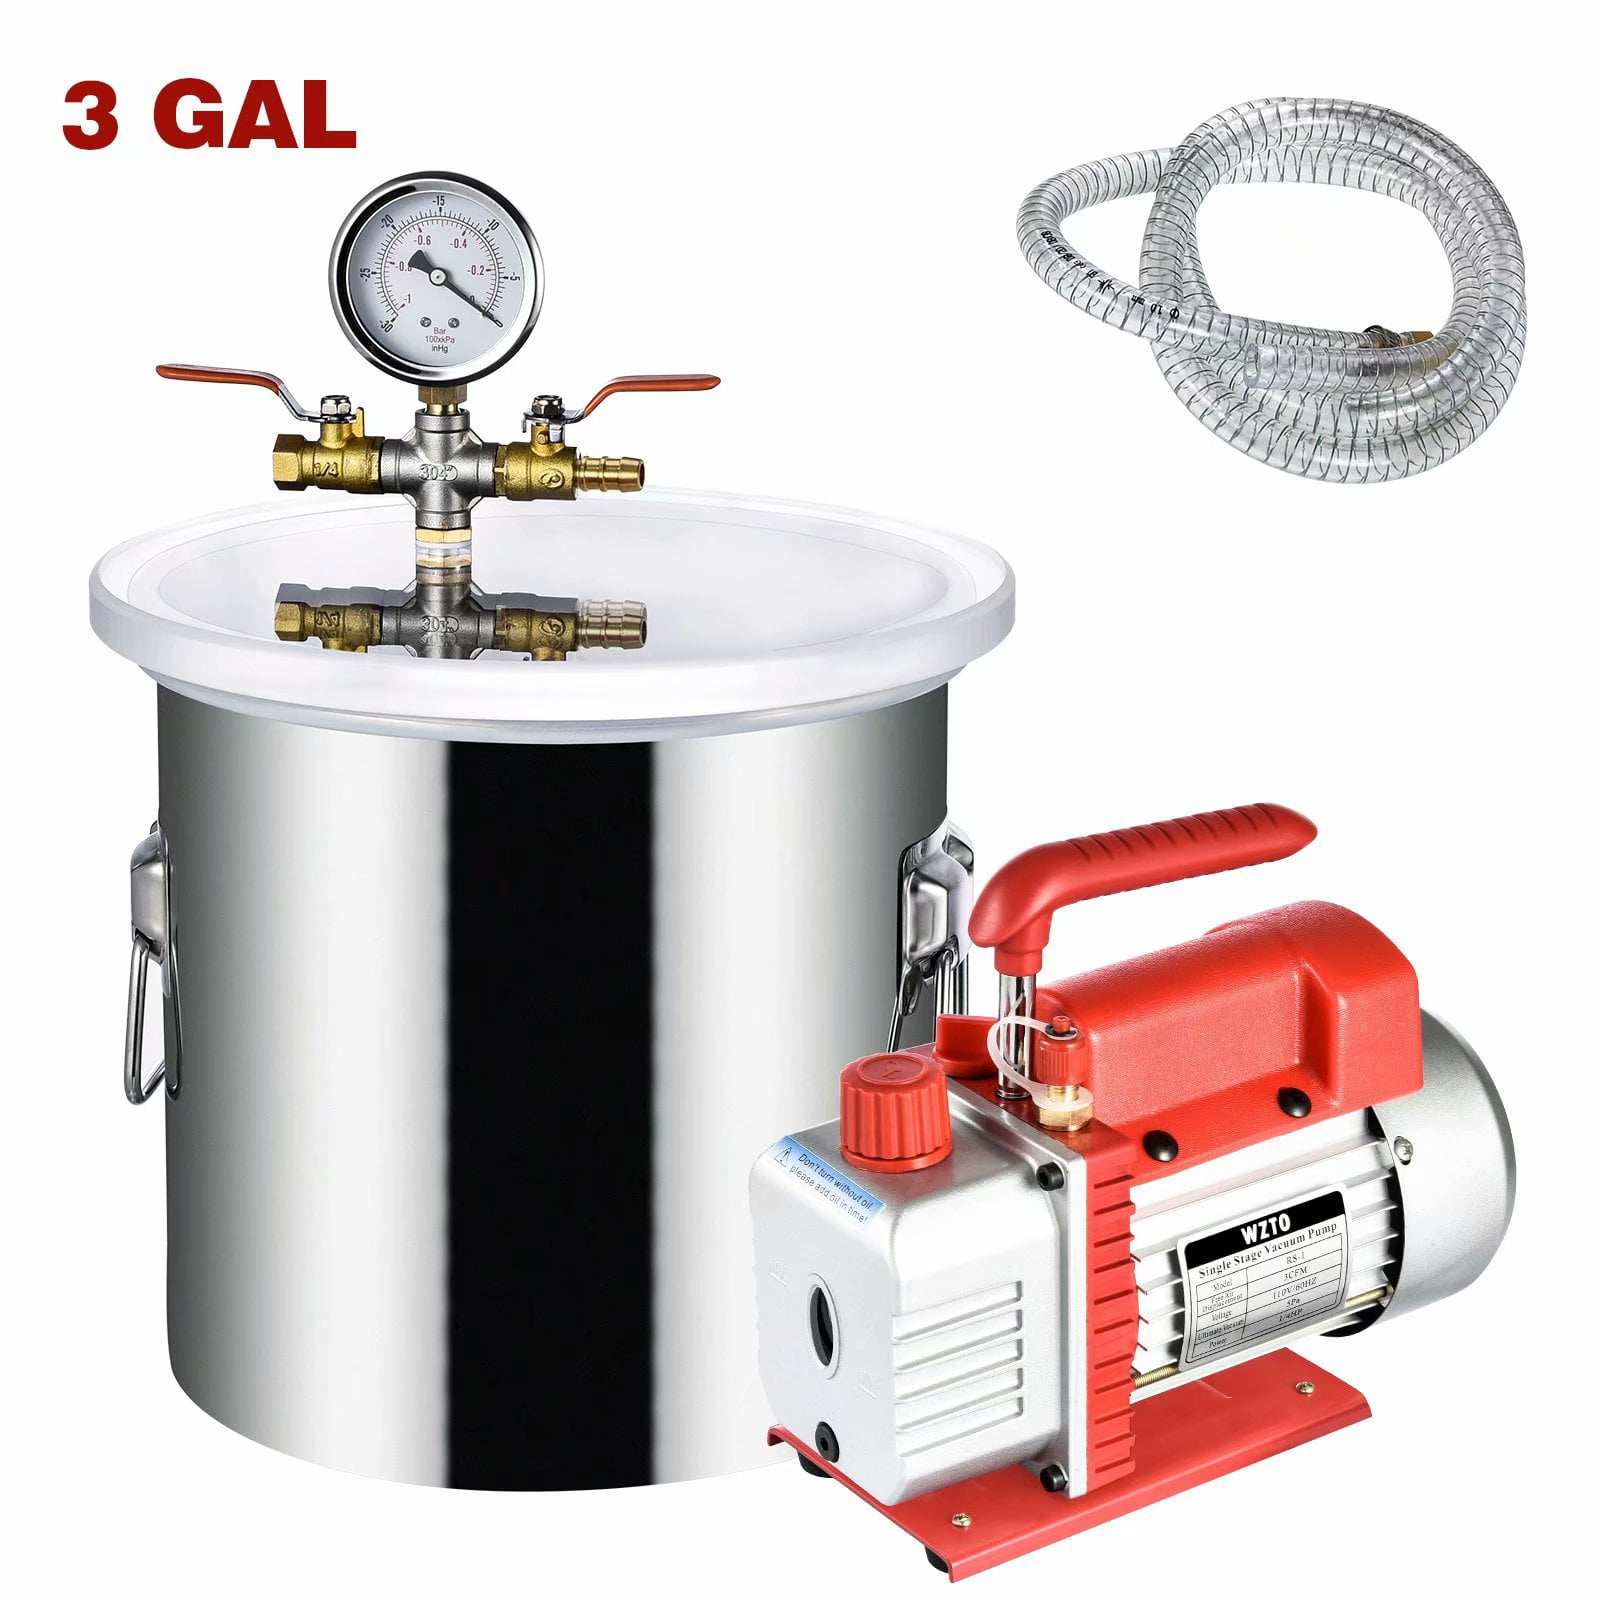 Not for Wood Stabilizing Hydrion Scientific 5 Gallon Vacuum Degassing Chamber Kit with 2 stage 7CFM Pump 